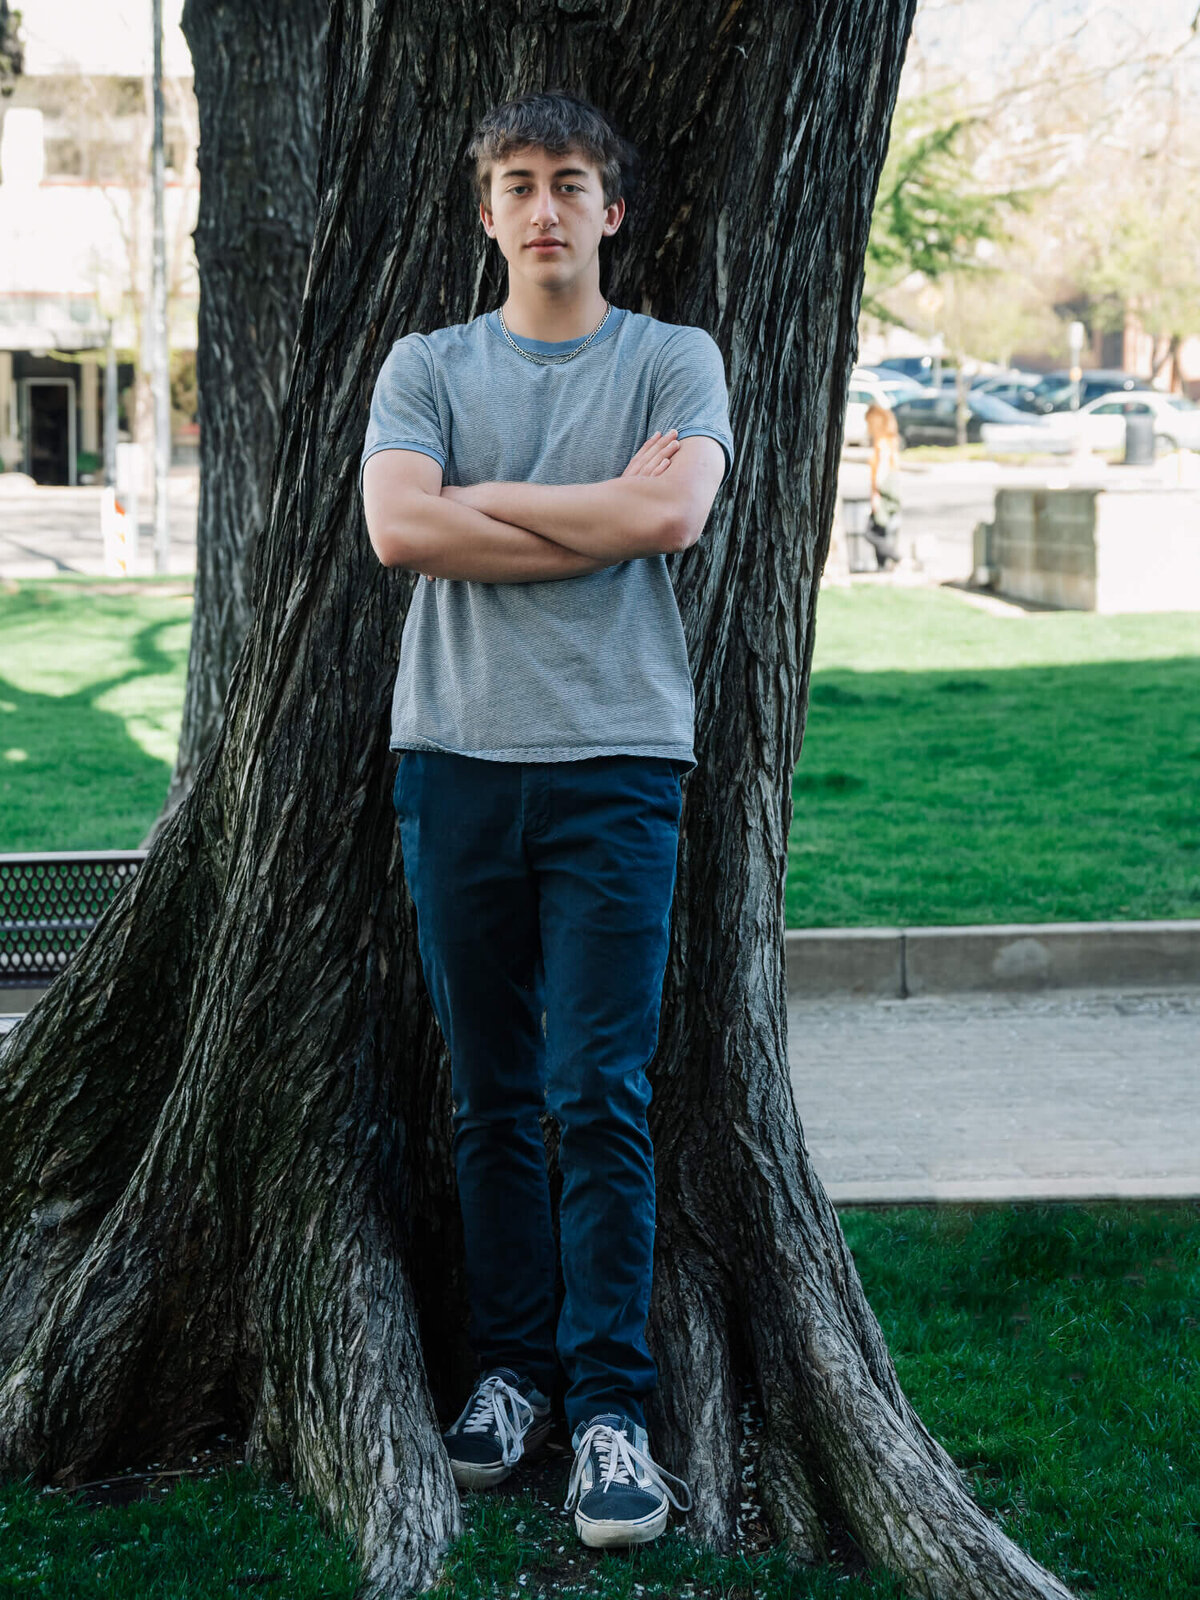 Boy poses against tree on Courthouse Square in Prescott senior photography session